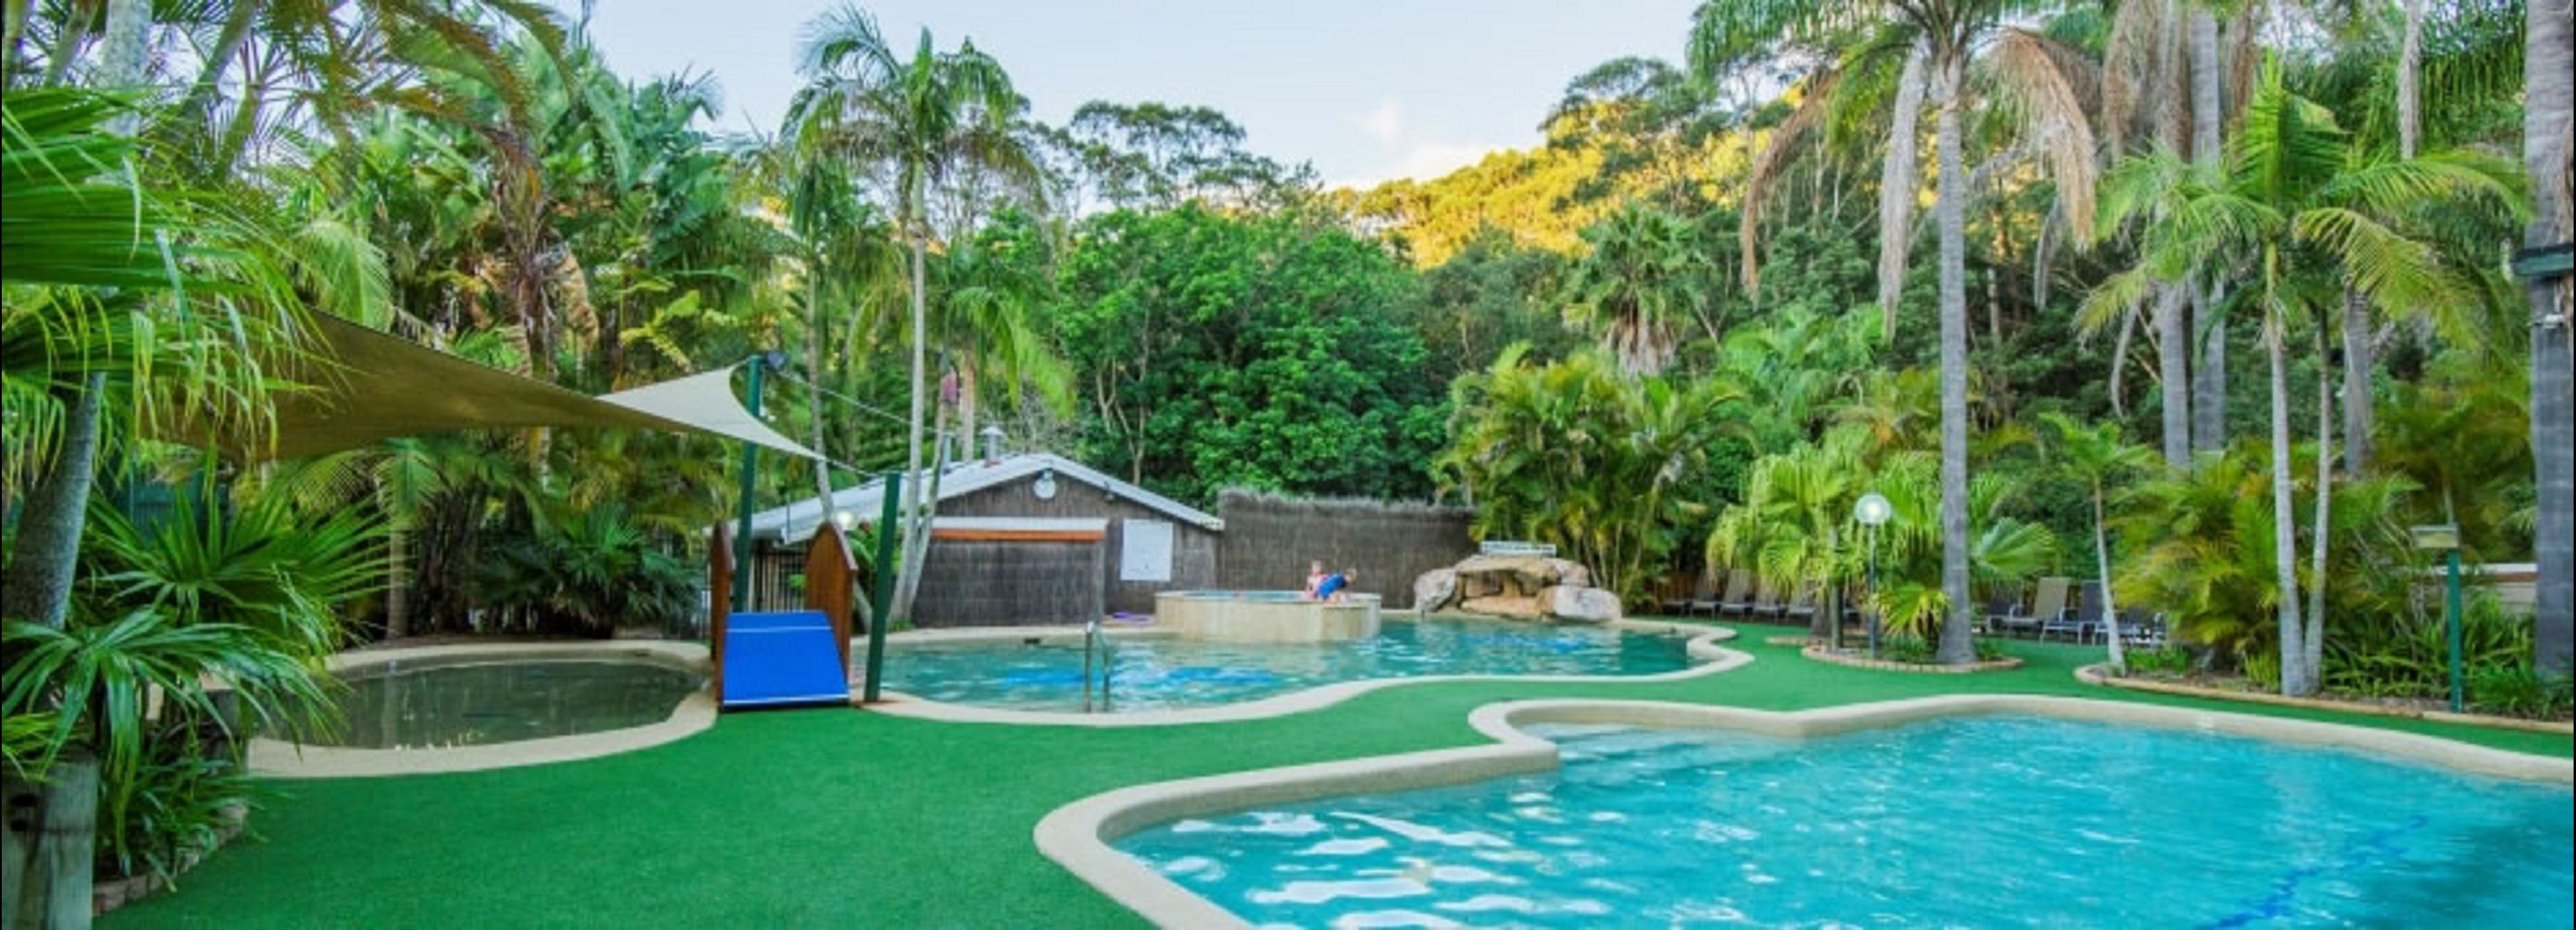 The Palms at Avoca - Accommodation Redcliffe